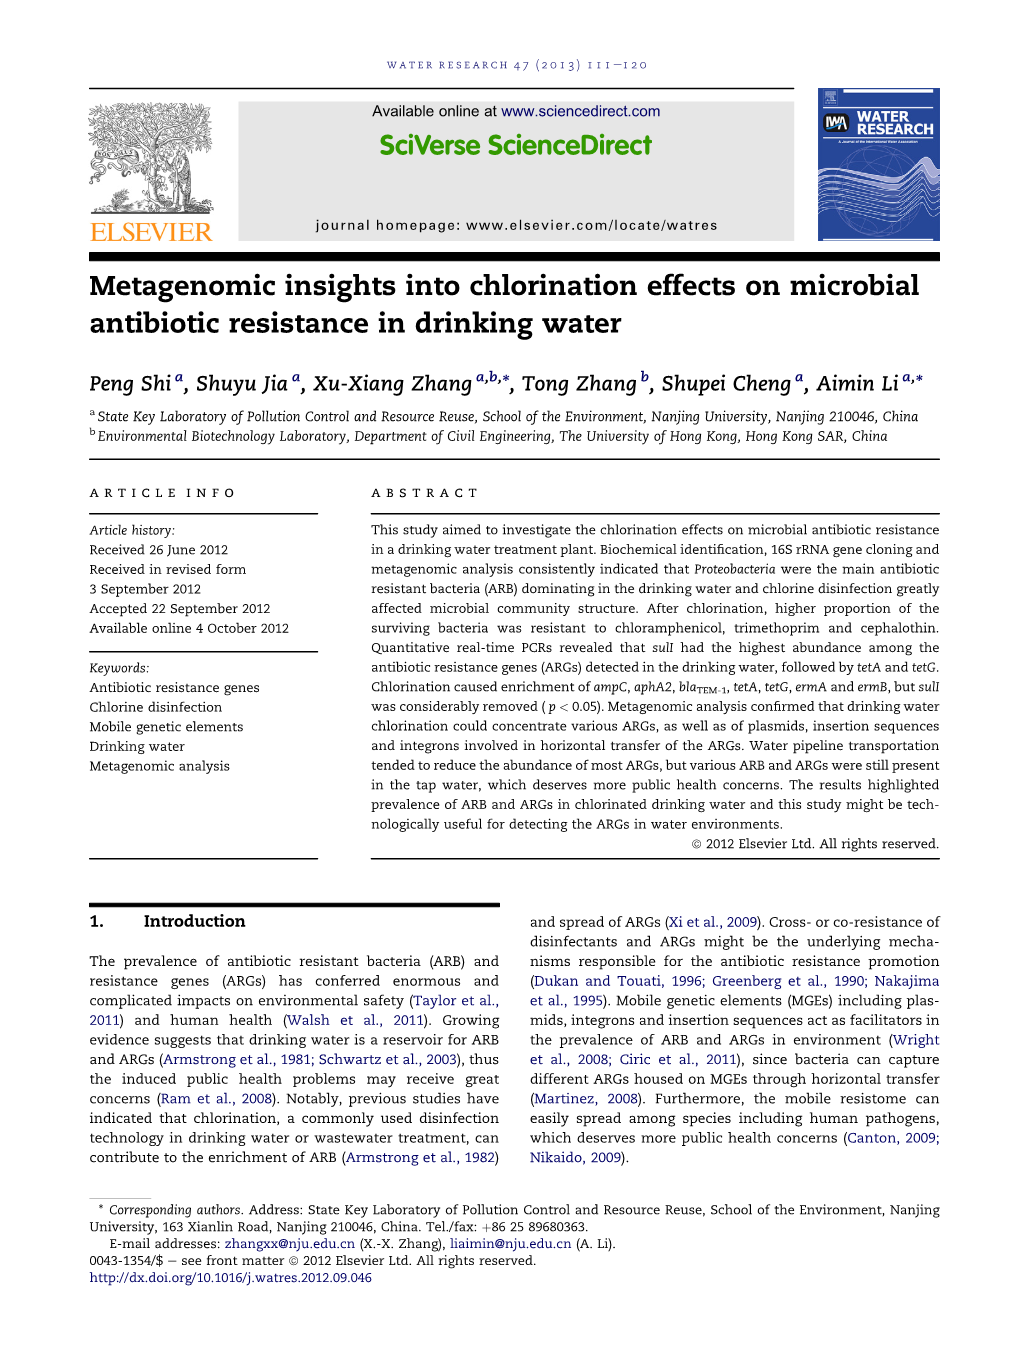 Metagenomic Insights Into Chlorination Effects on Microbial Antibiotic Resistance in Drinking Water